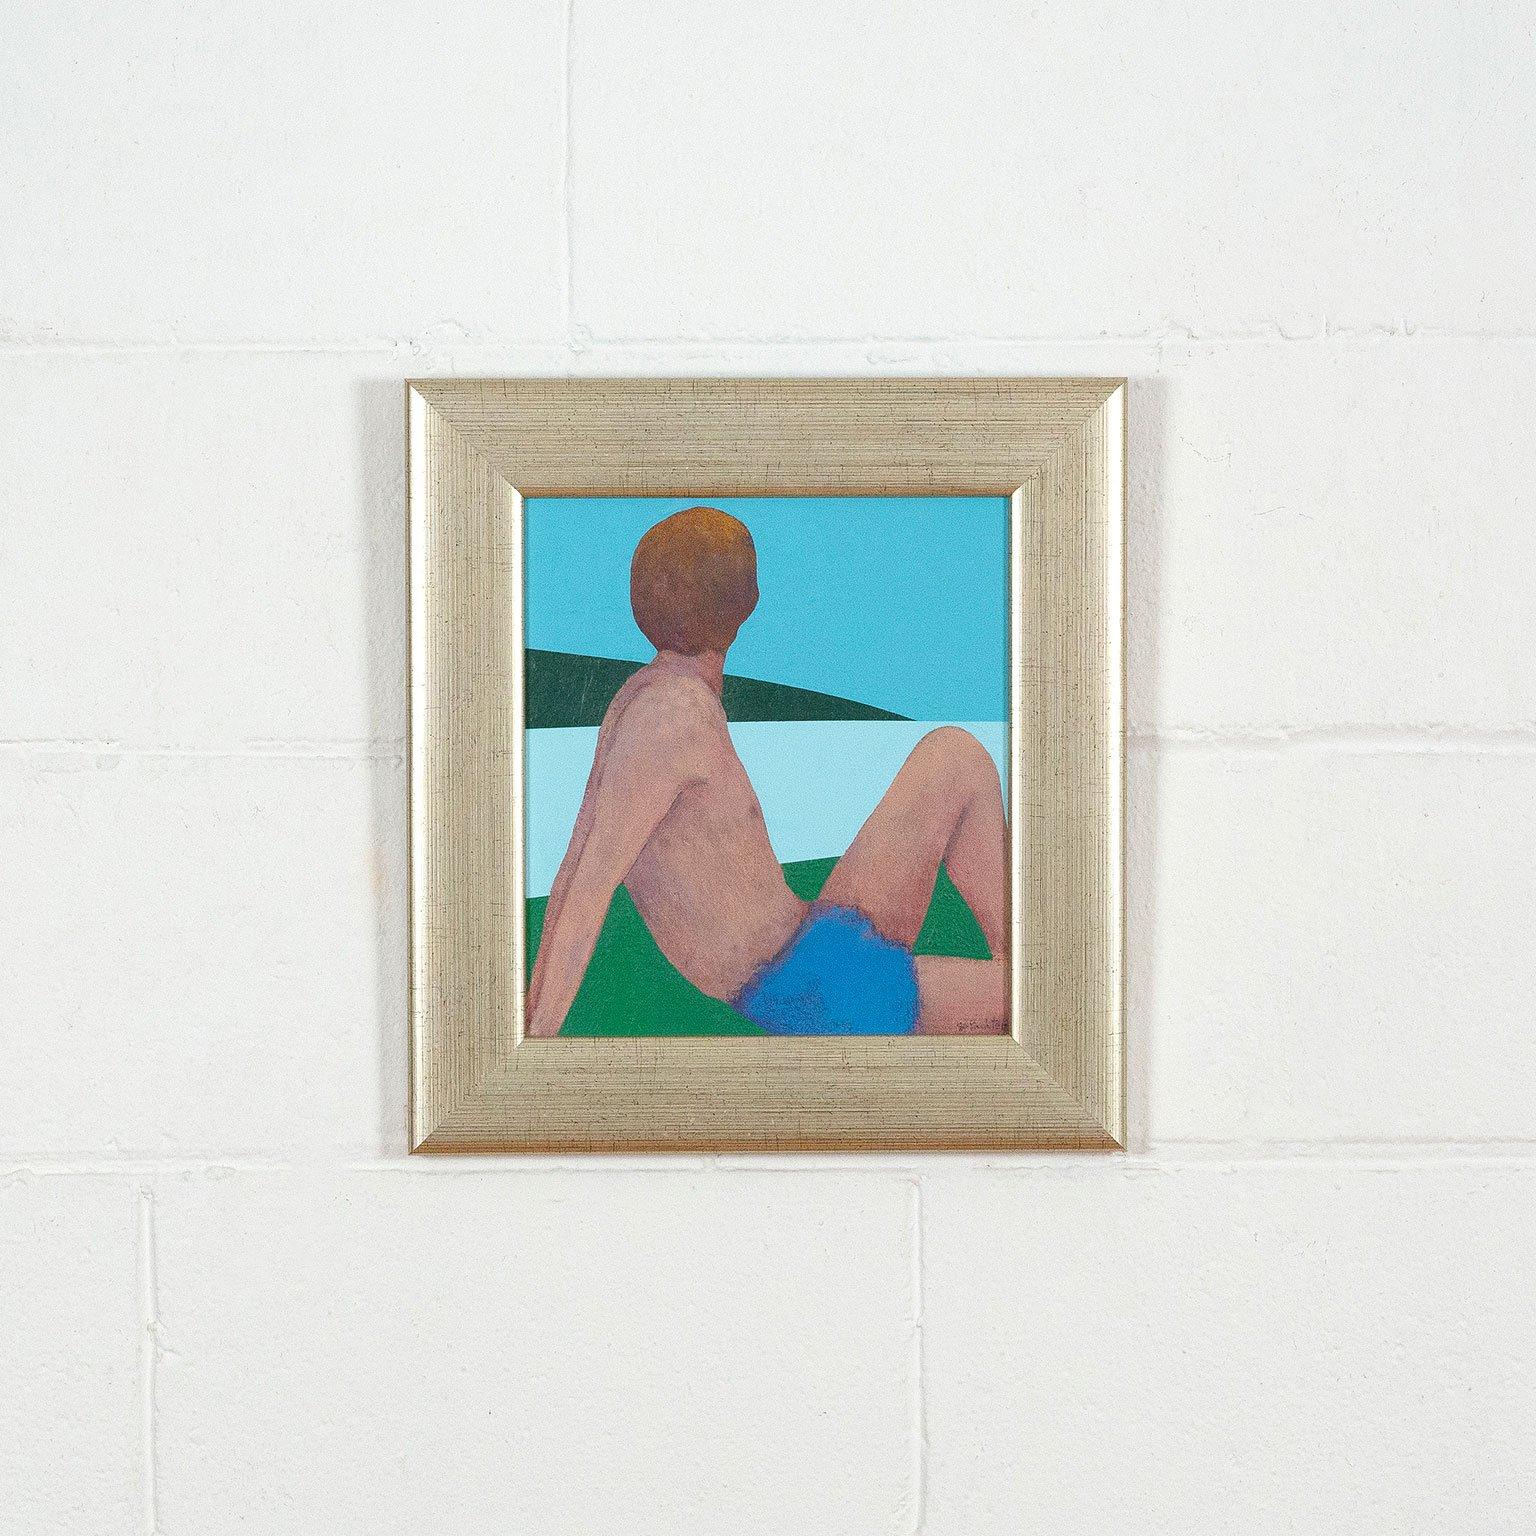 Bather - Painting by Charles Pachter